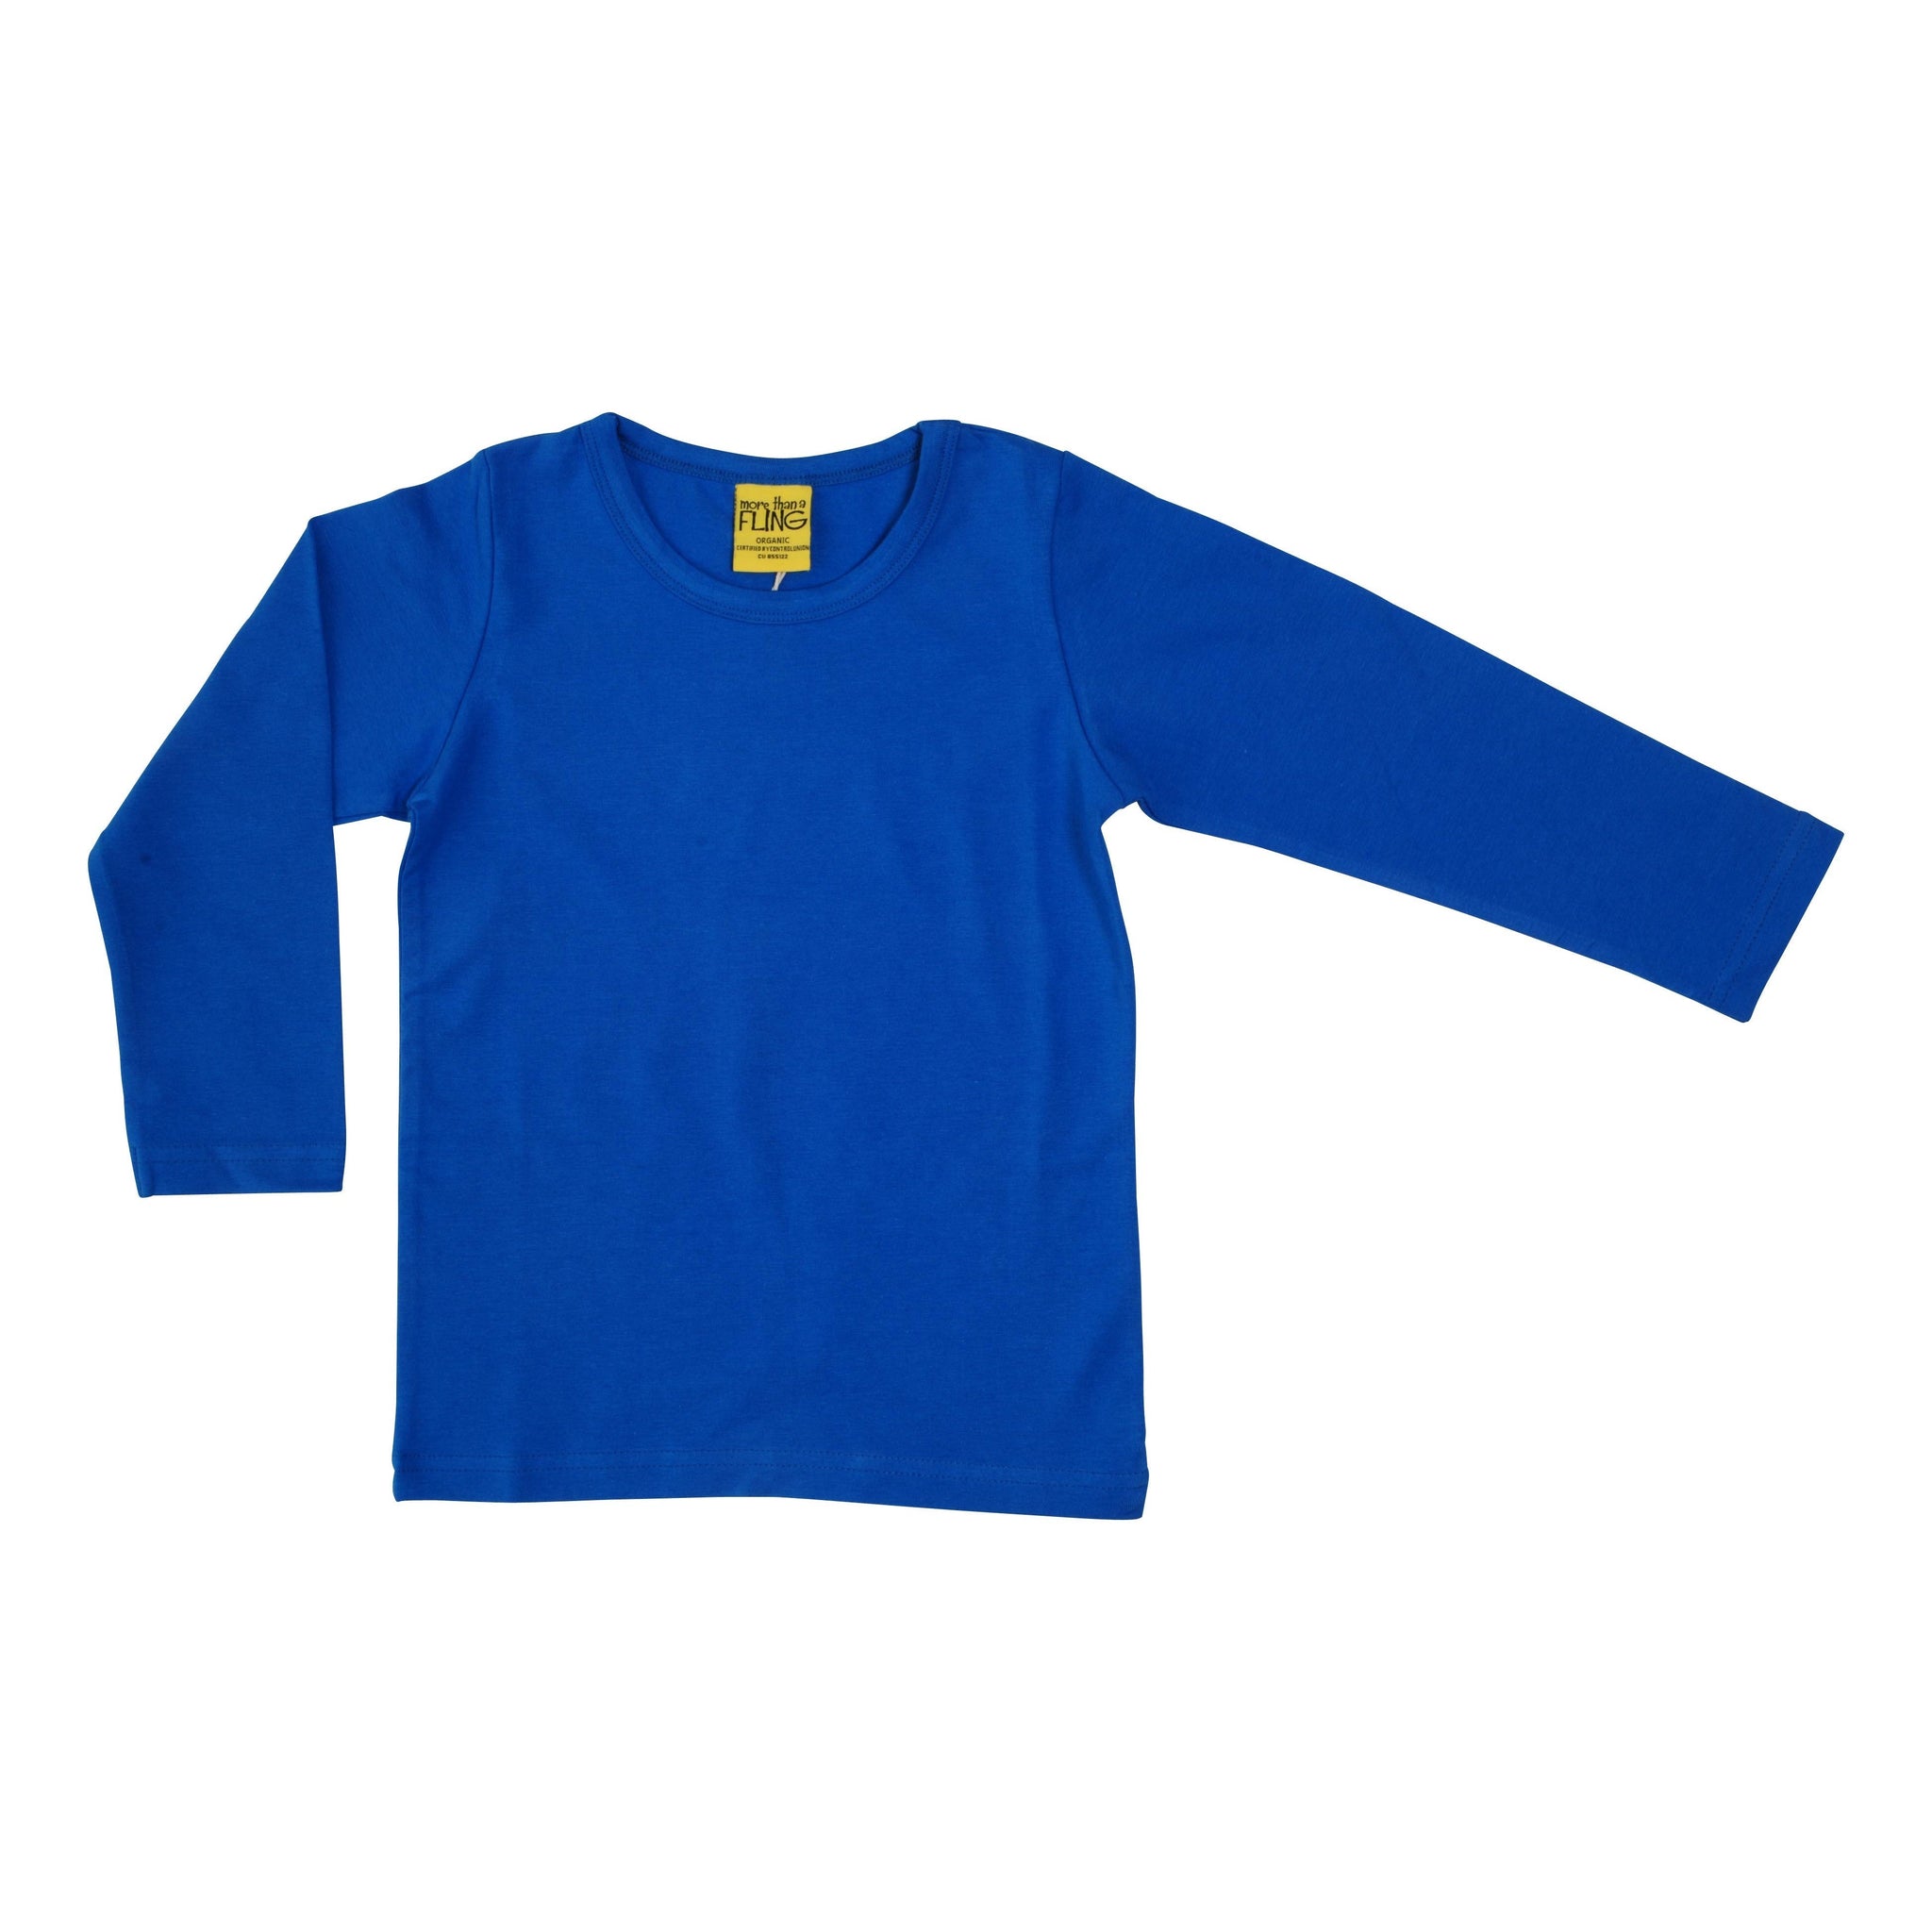 More Than A FLING - Strong Blue Long Sleeved Top